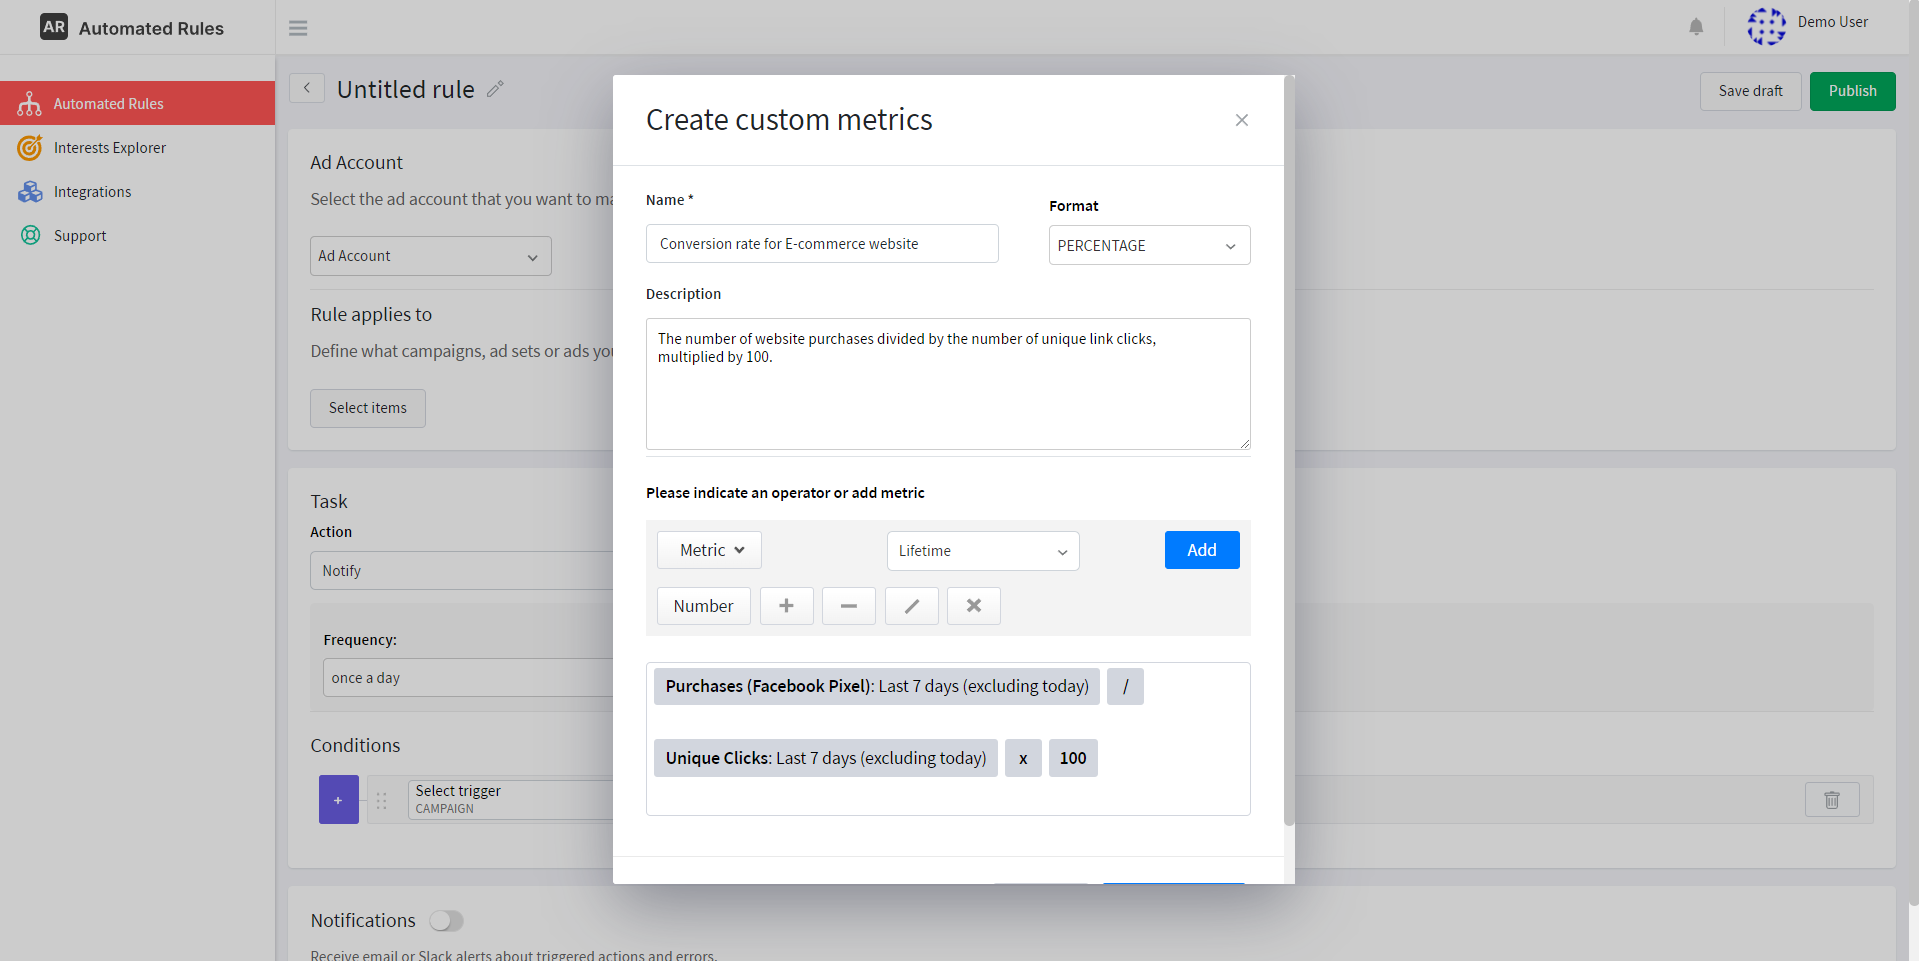 Creating the Conversion rate custom metric with AutomatedRules